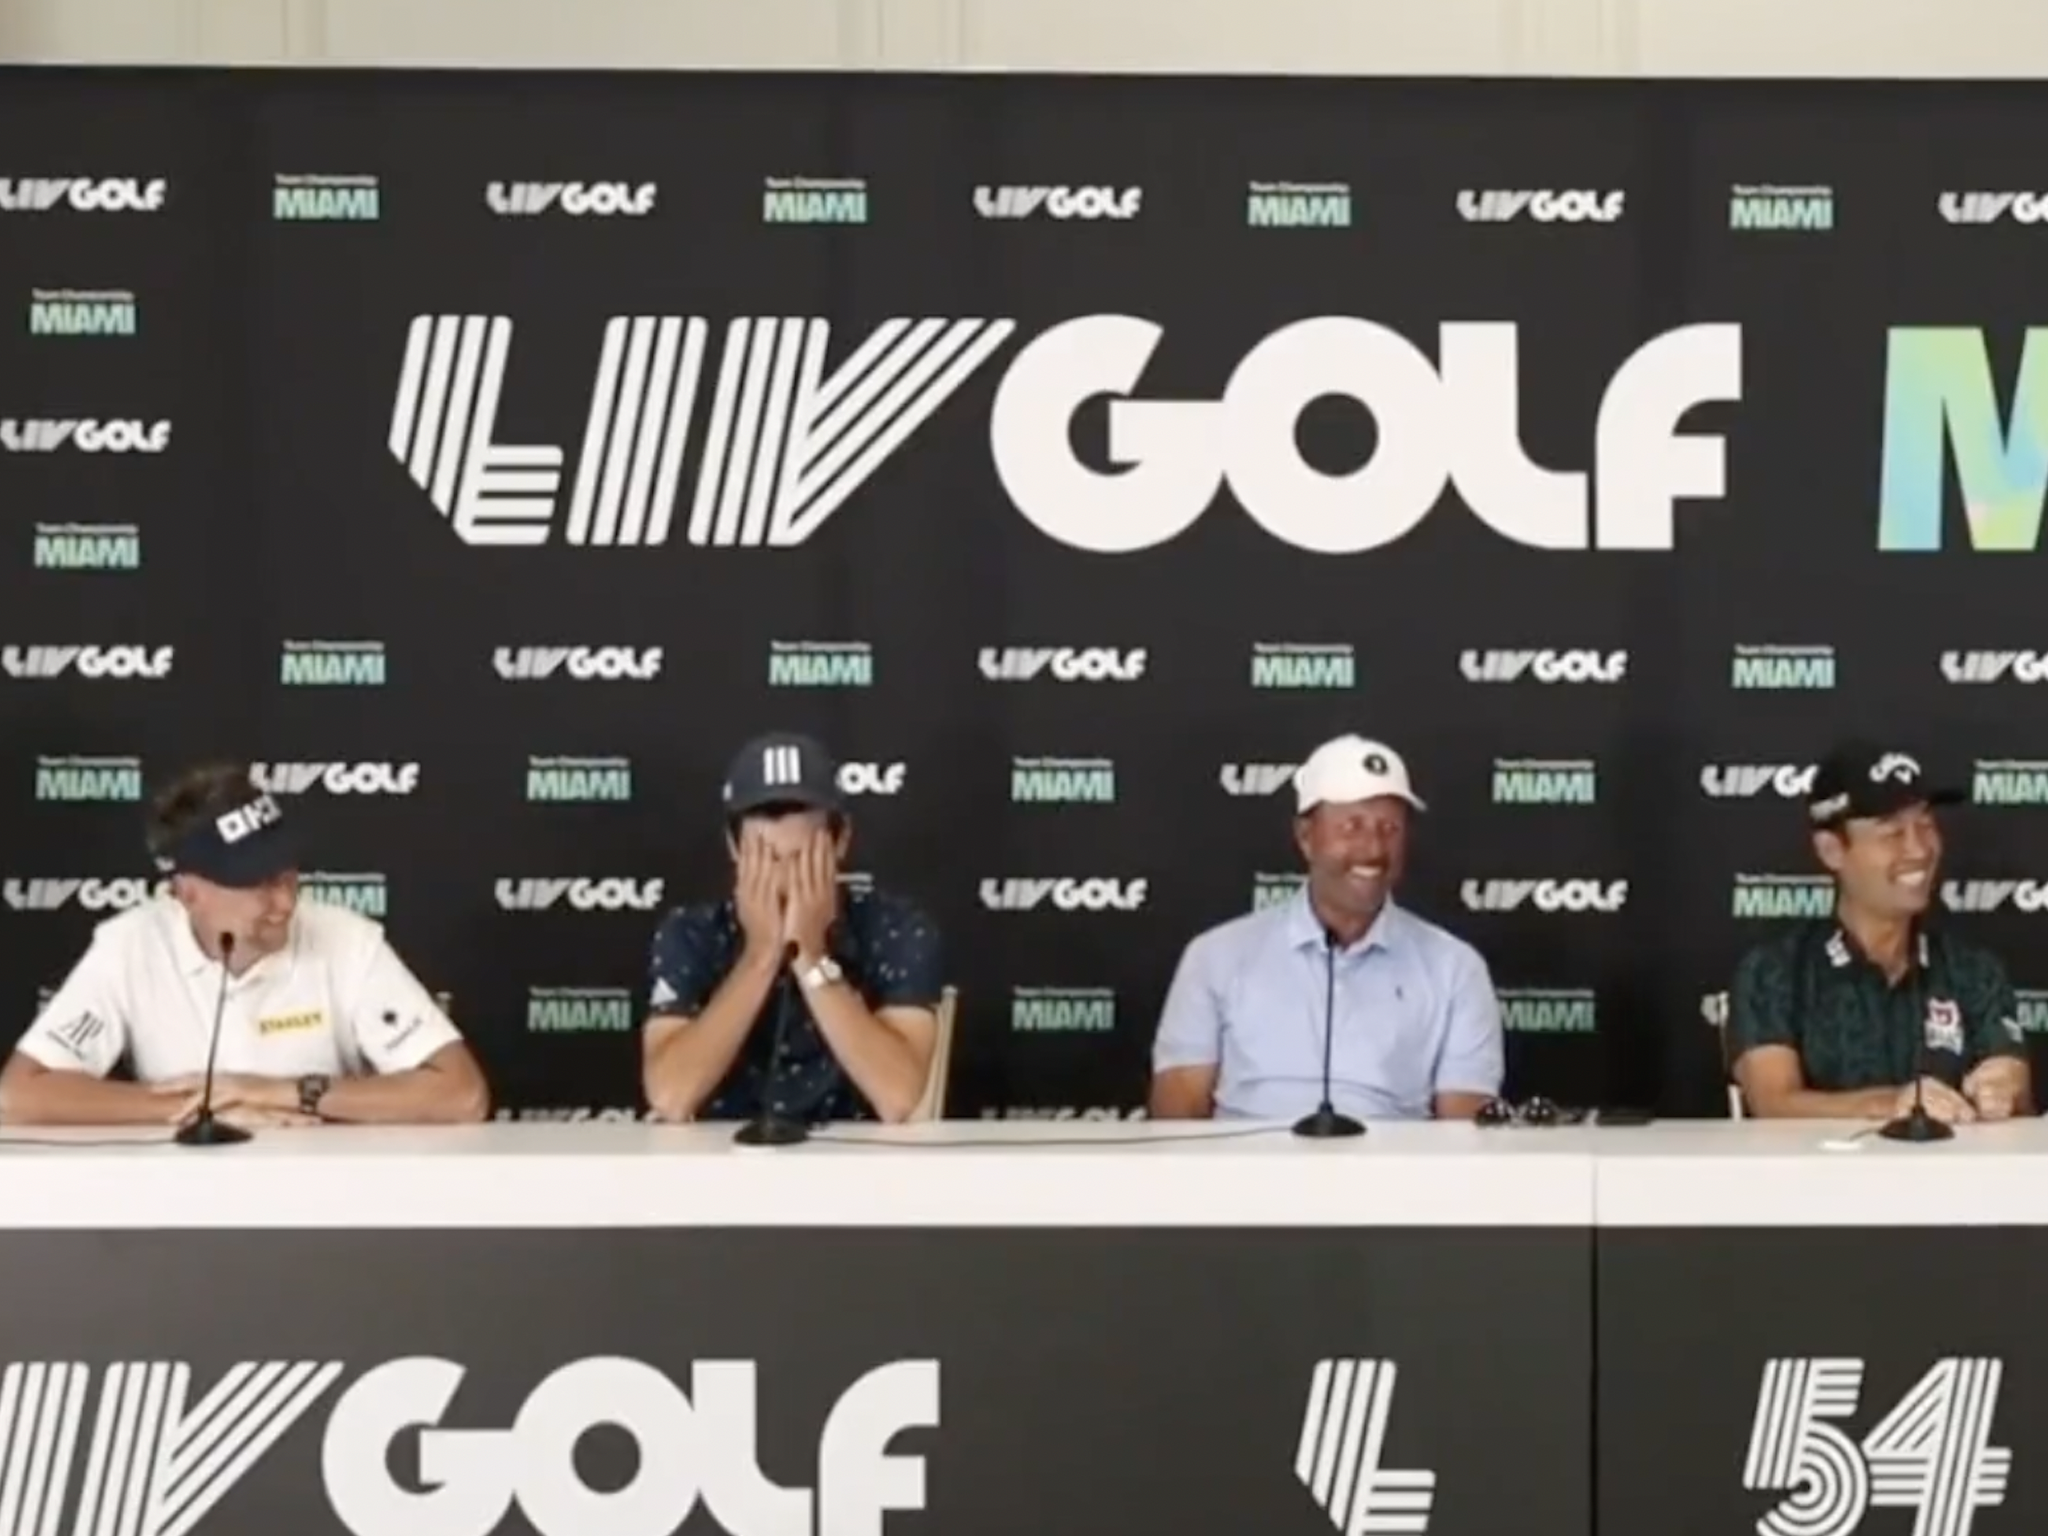 Not sure its possible to play any slower – Things got awkward between Ian Poulter and Kevin Na at LIV presser pic